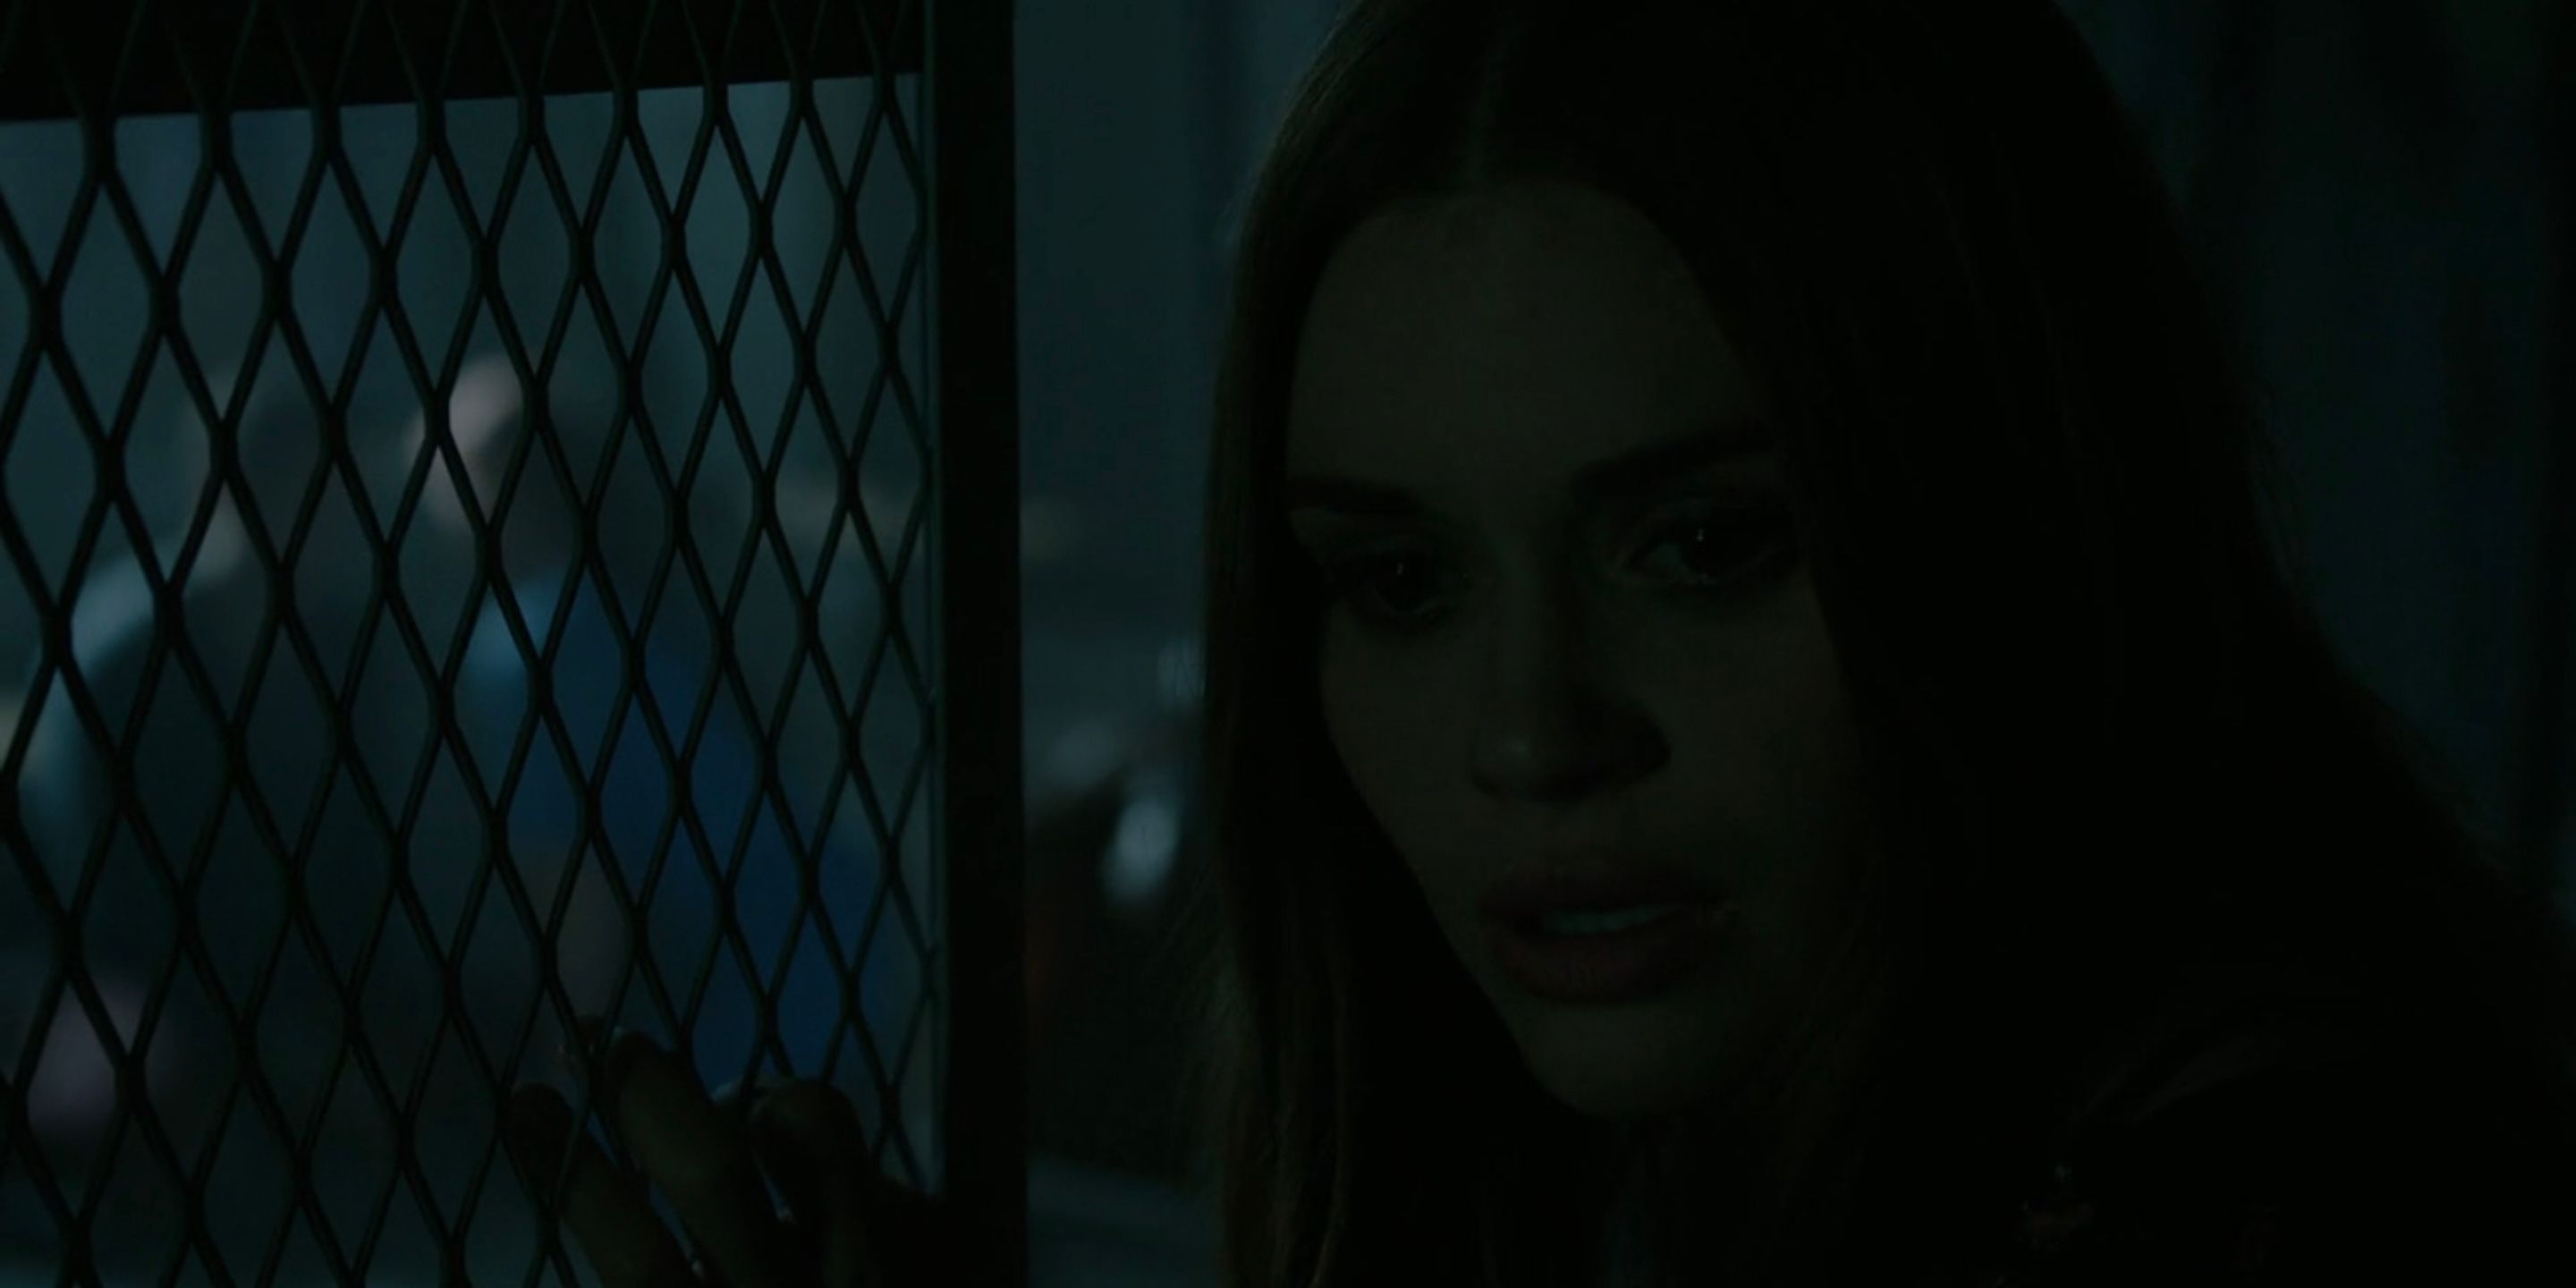 Lydia remembers Stiles in Teen Wolf.